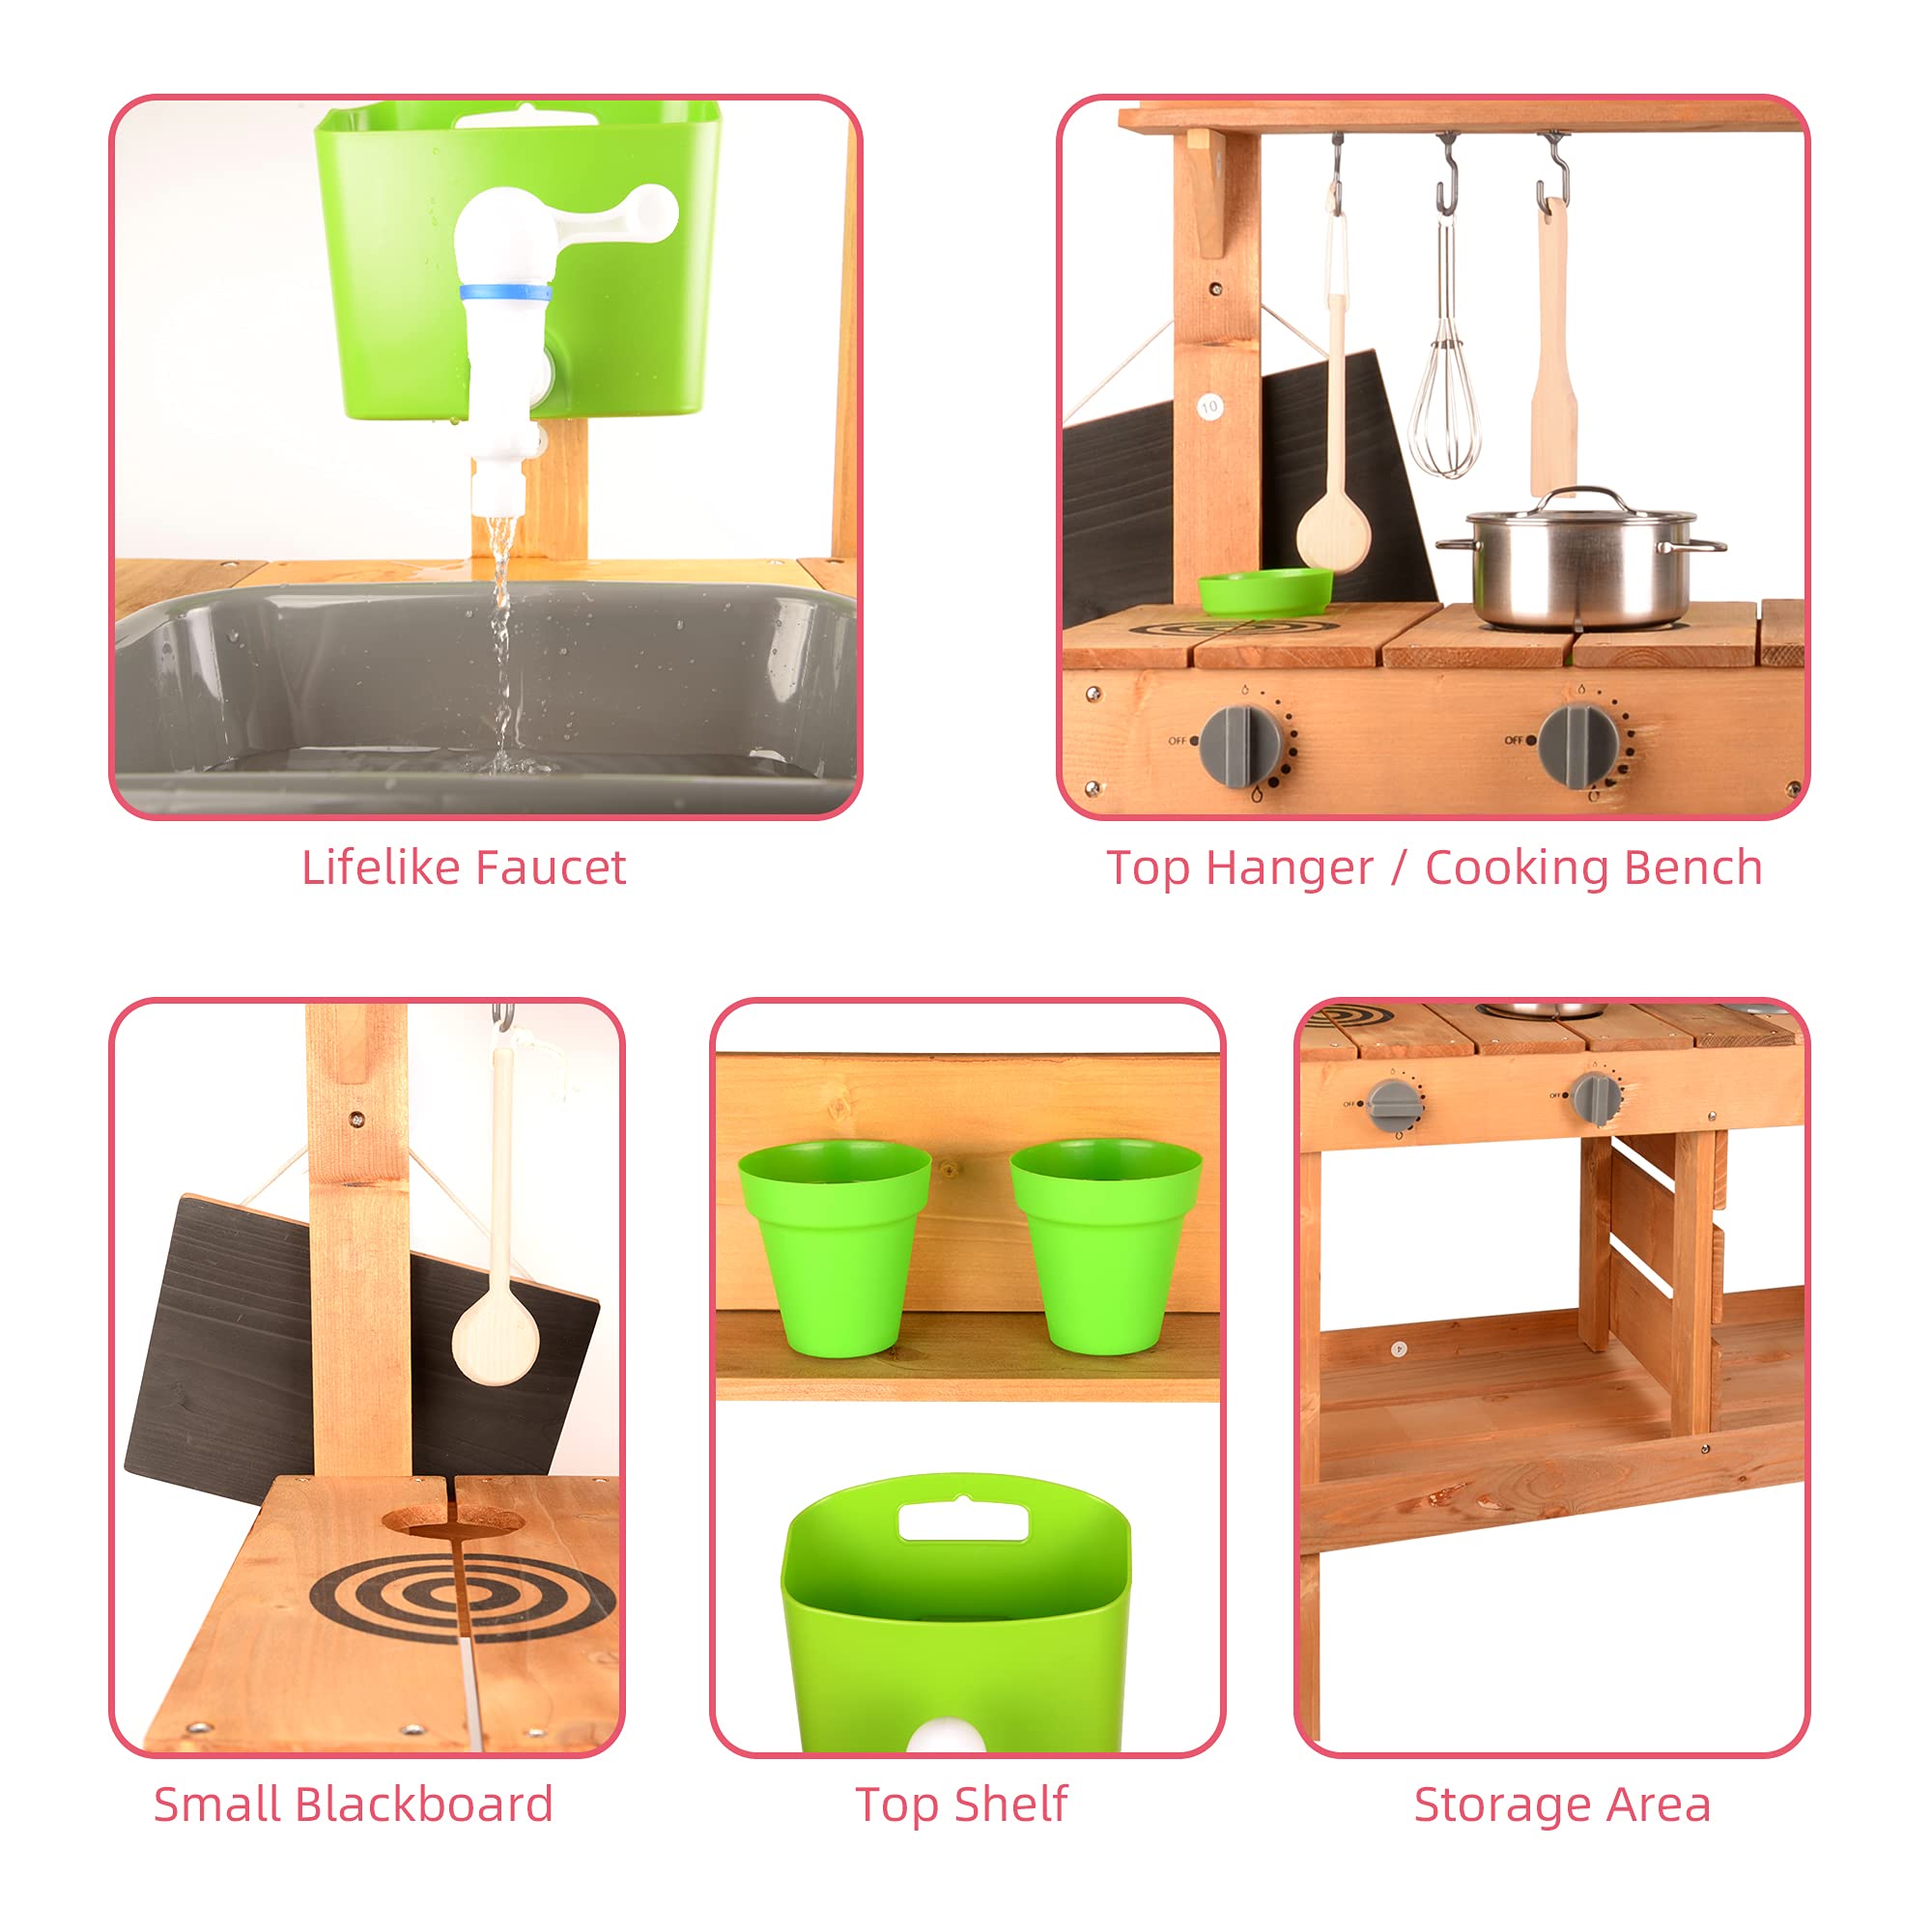 Wooden Kitchen, Kitchen Accessories and Garden Sink, Backyard Pretend Play for Toddlers,Kids Outdoor Upright Kitchen Playset with Faucet, 32.3 x 16.9 x 38 inches, Wood Color